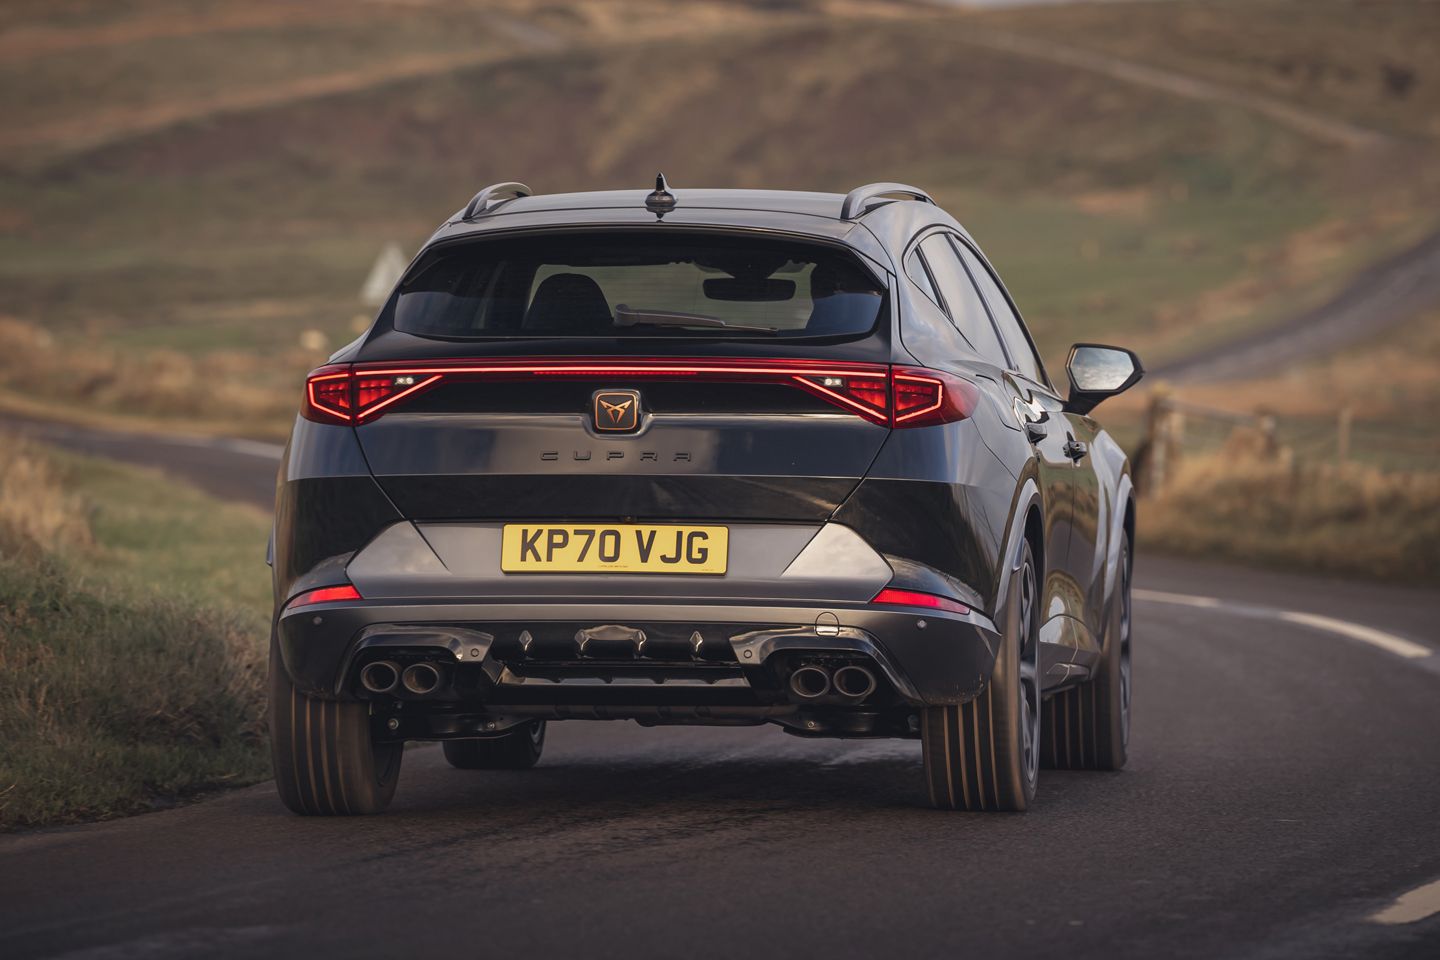 2020 Cupra Formentor priced from £39,830